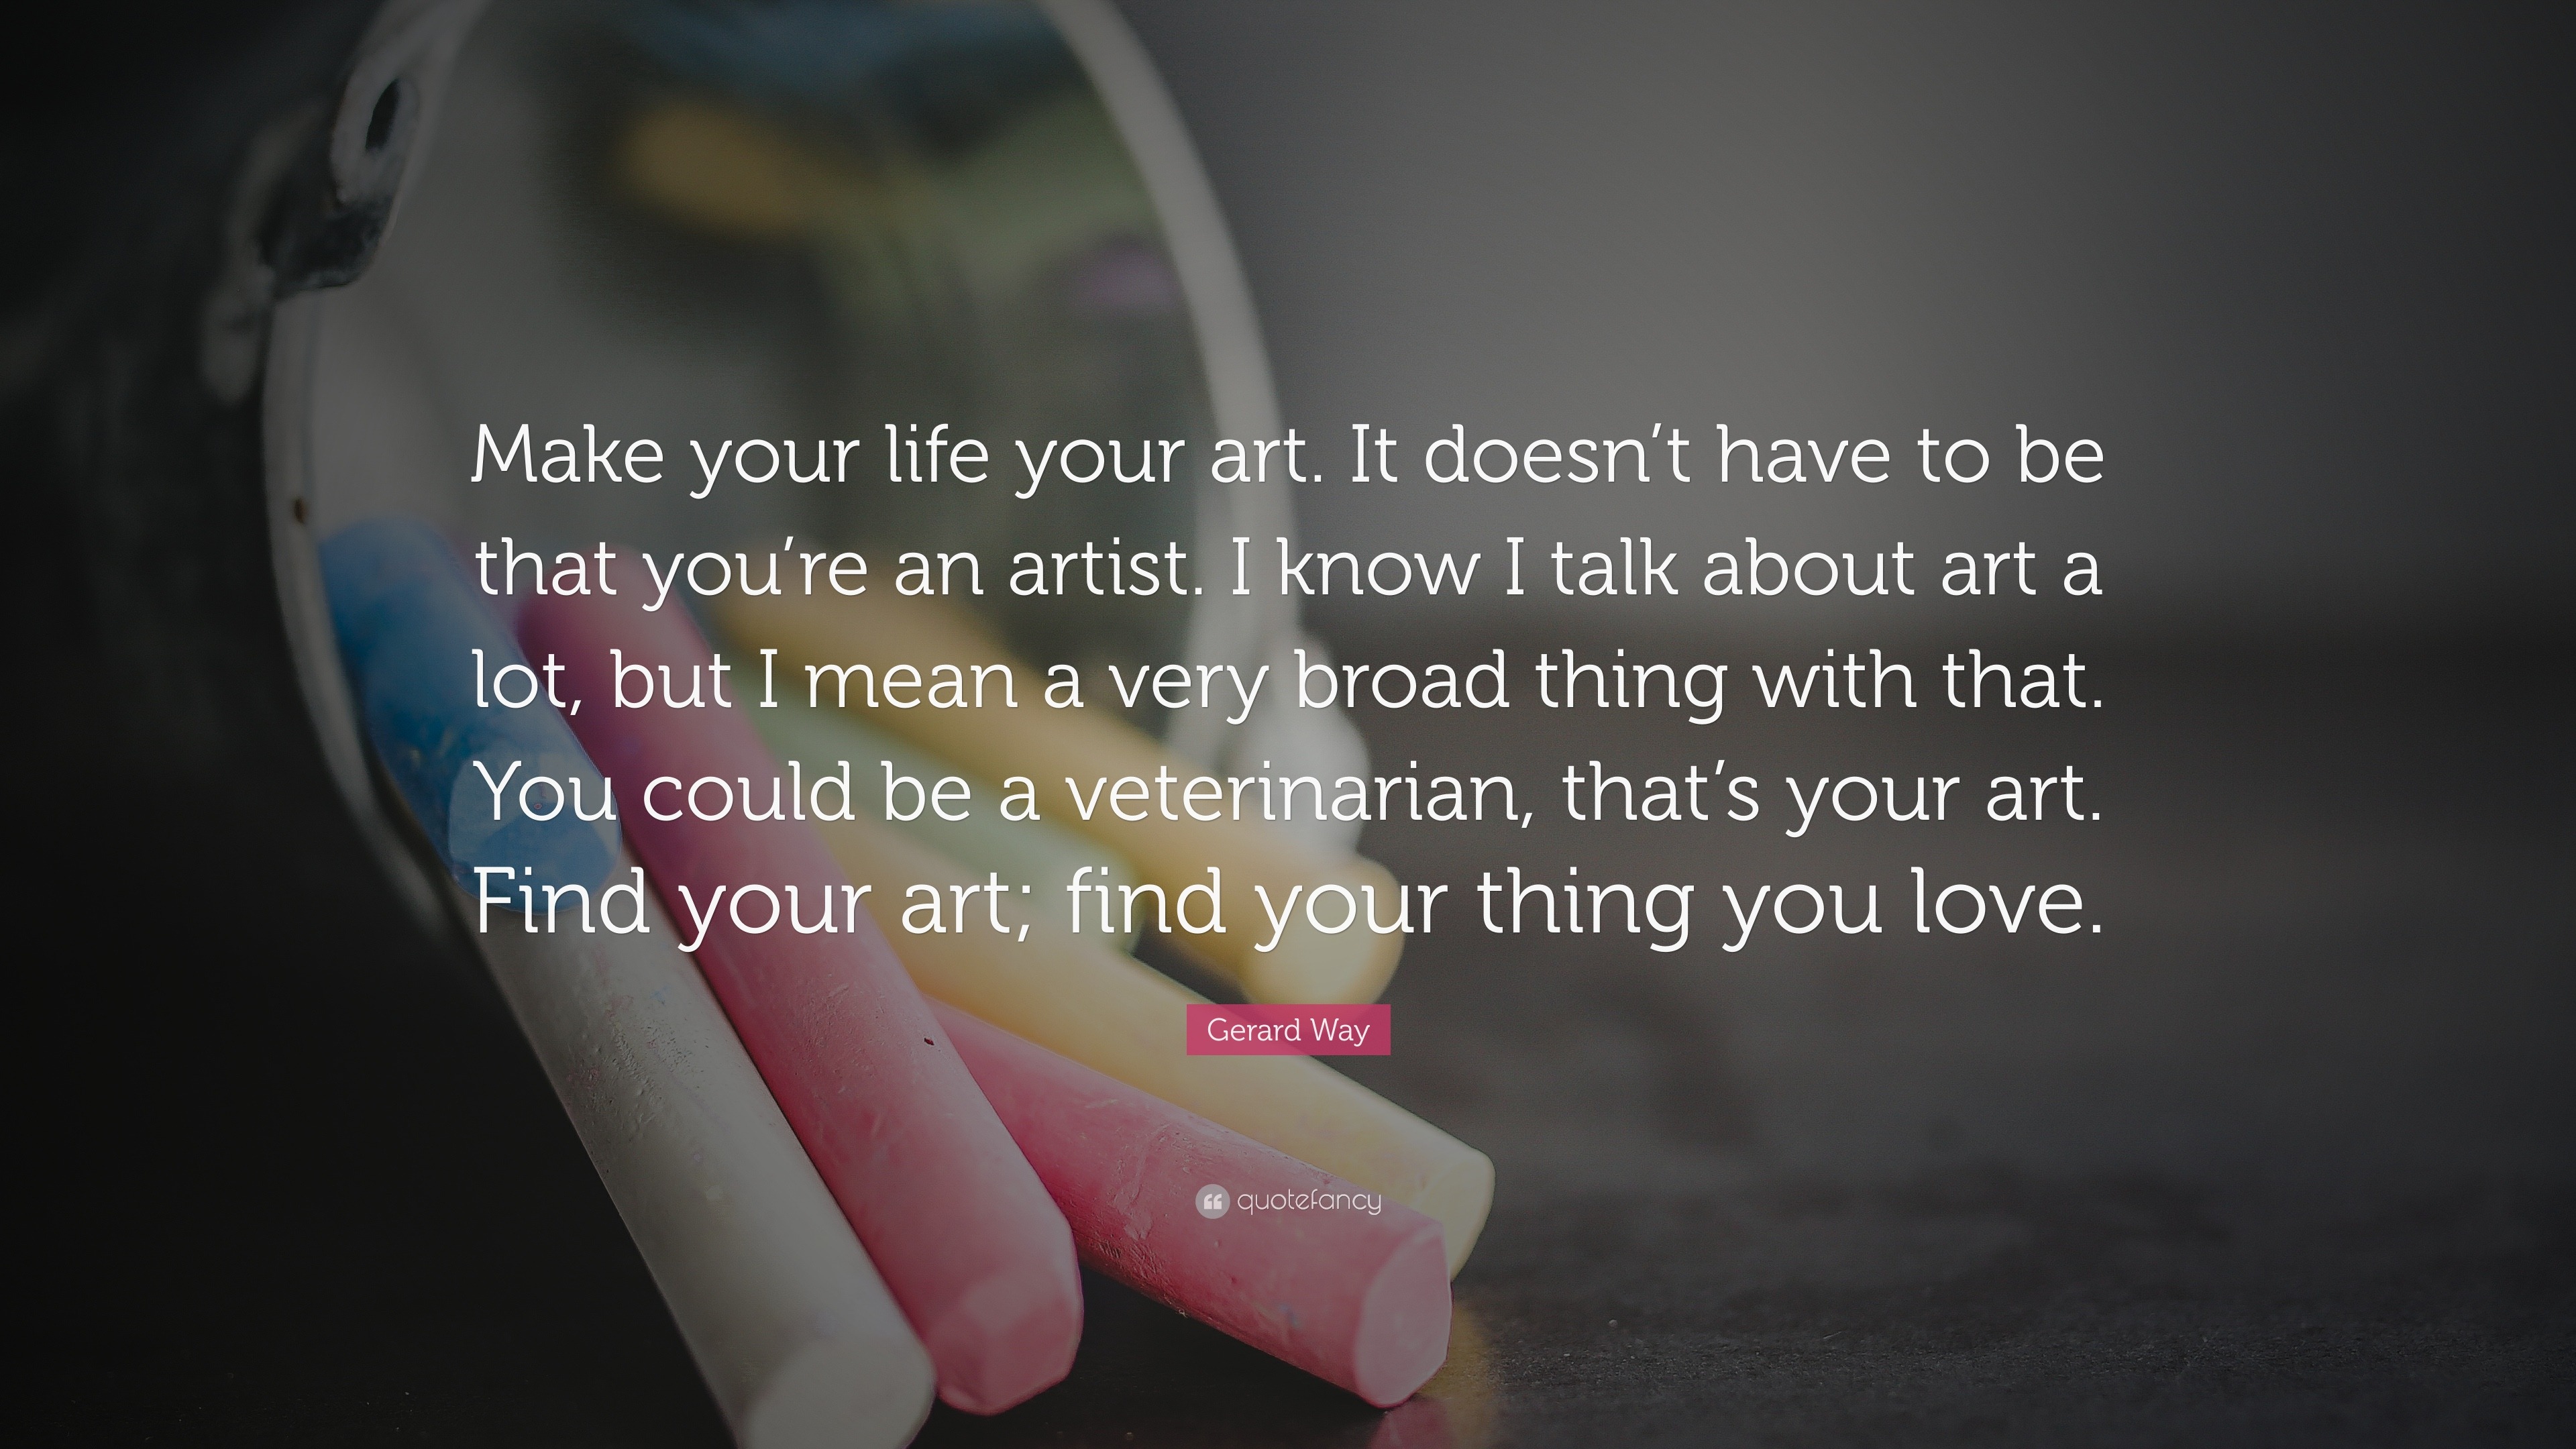 Gerard Way Quote: “Make your life your art. It doesn’t have to be that